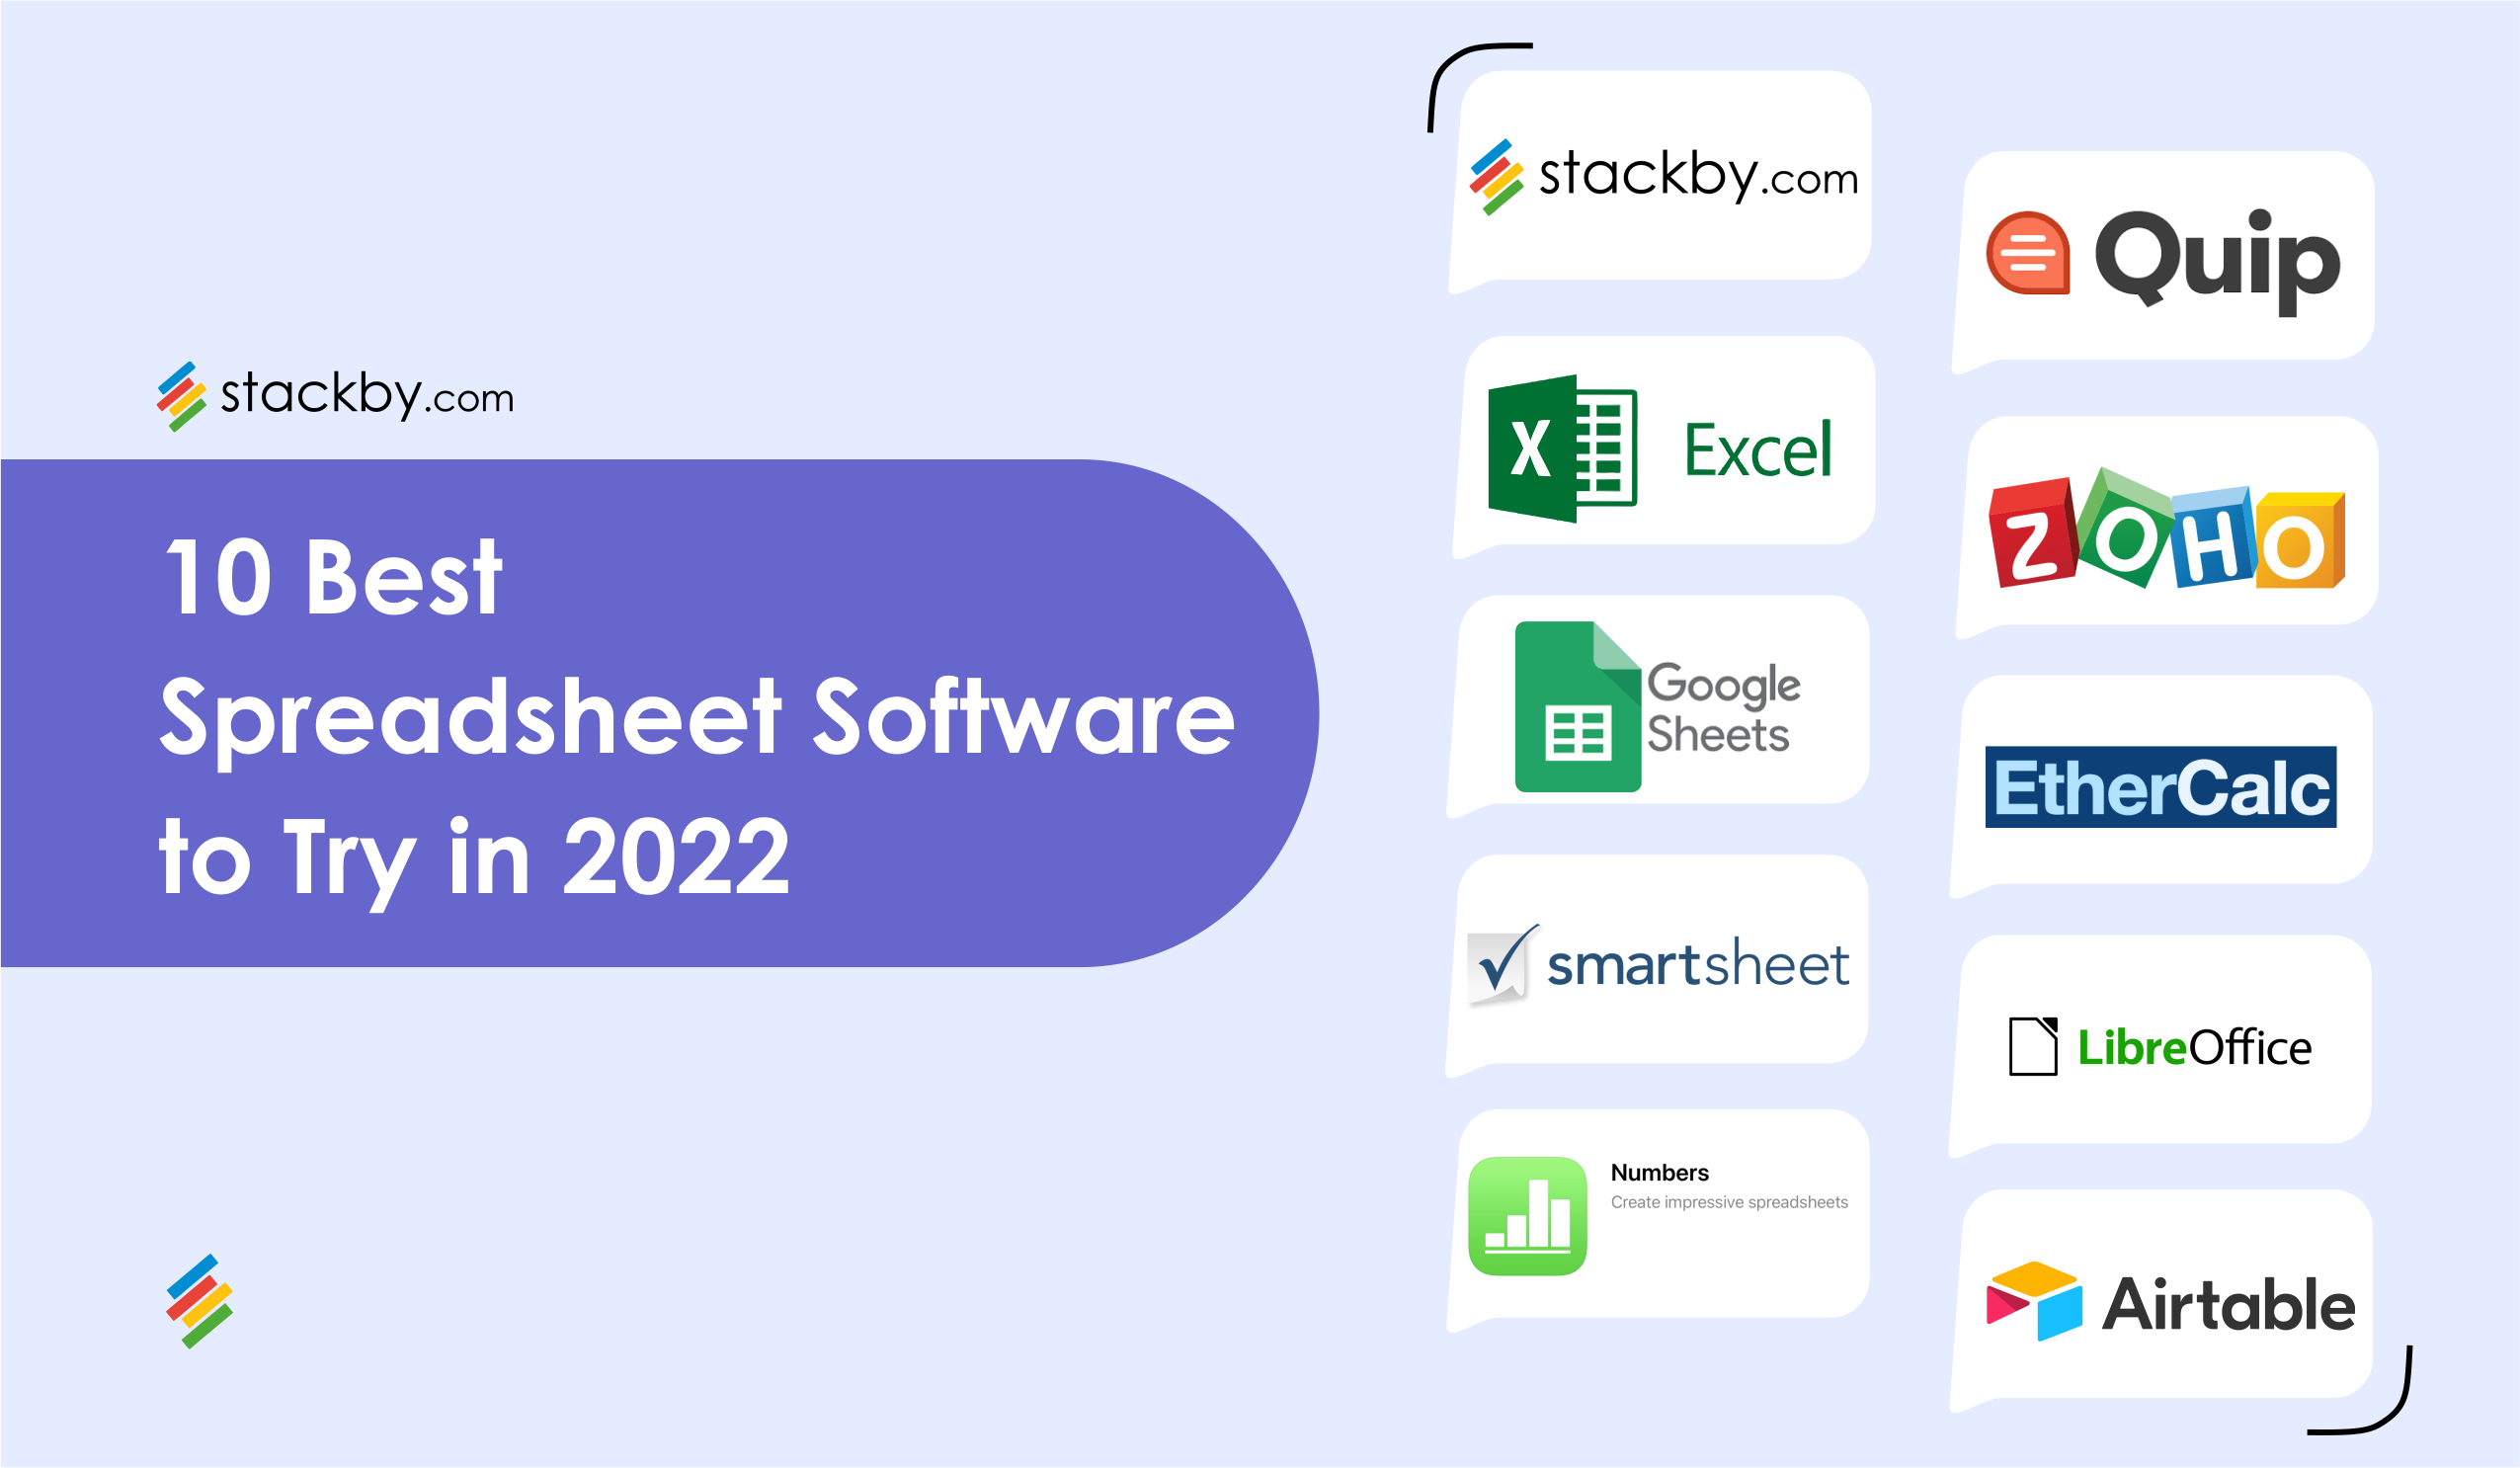 10 Best Spreadsheet Software to Try in 2022